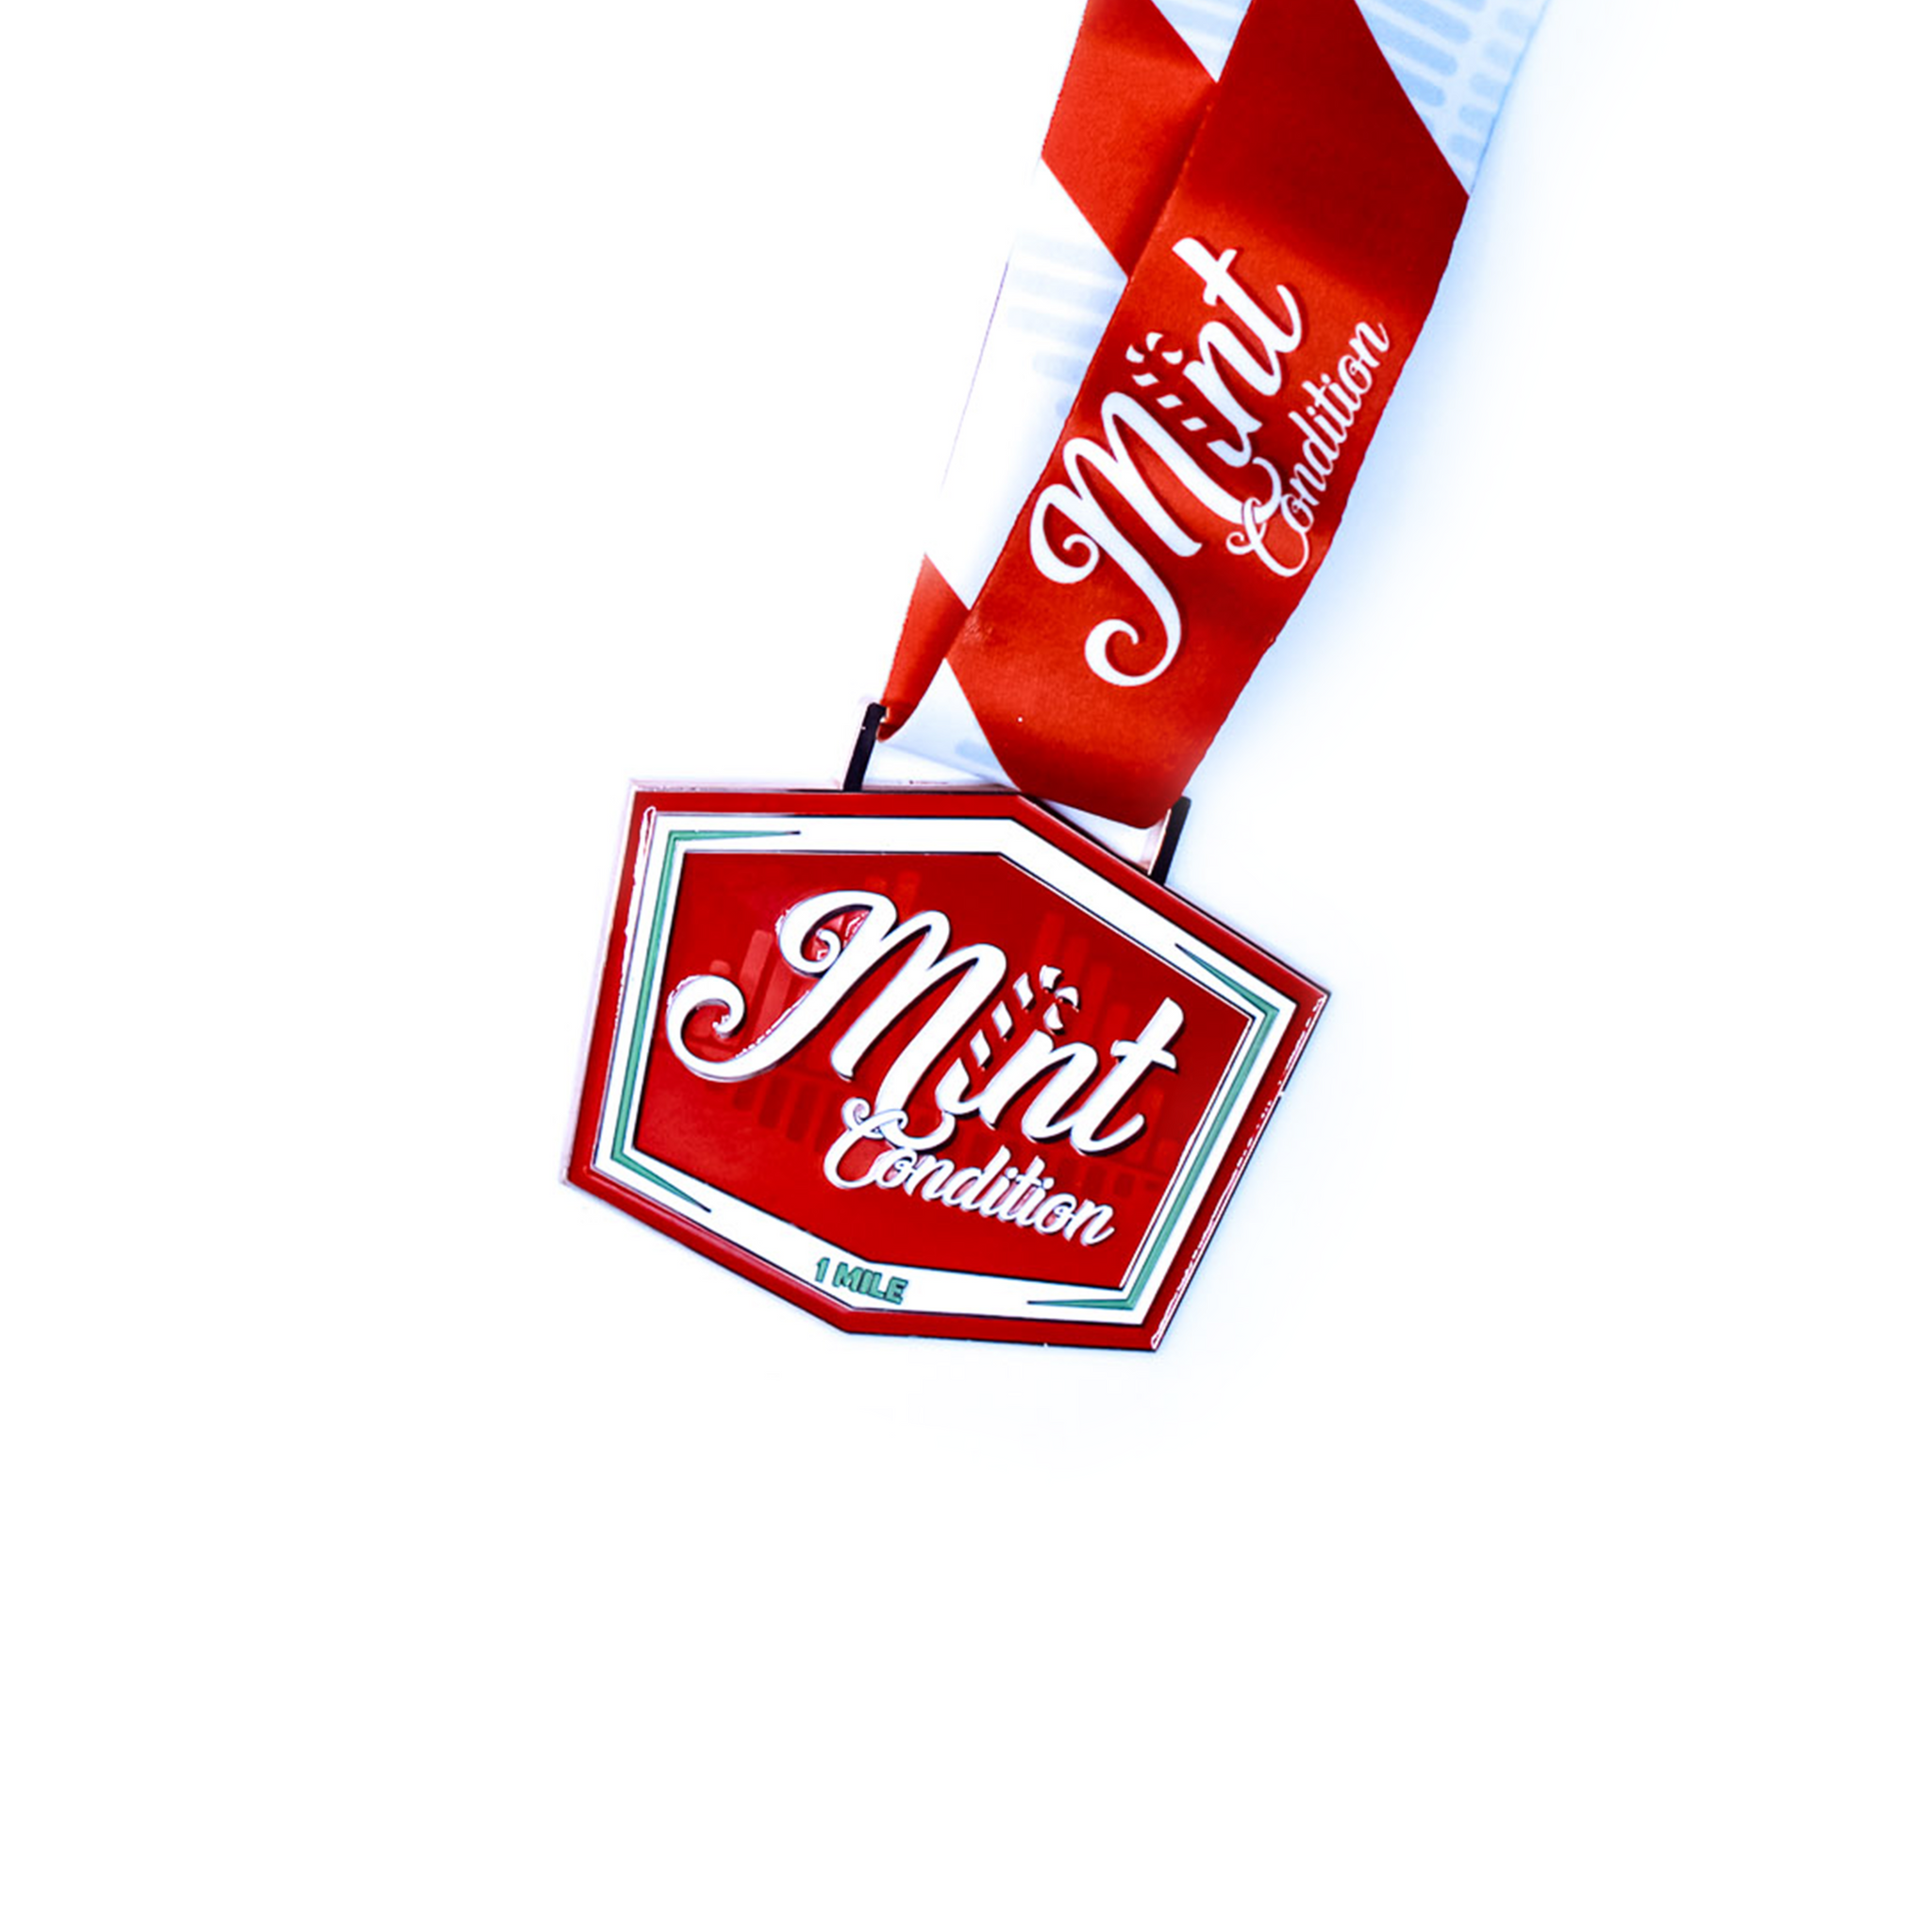 Holiday Series: Mint Condition 1 Mile - Entry + Medal